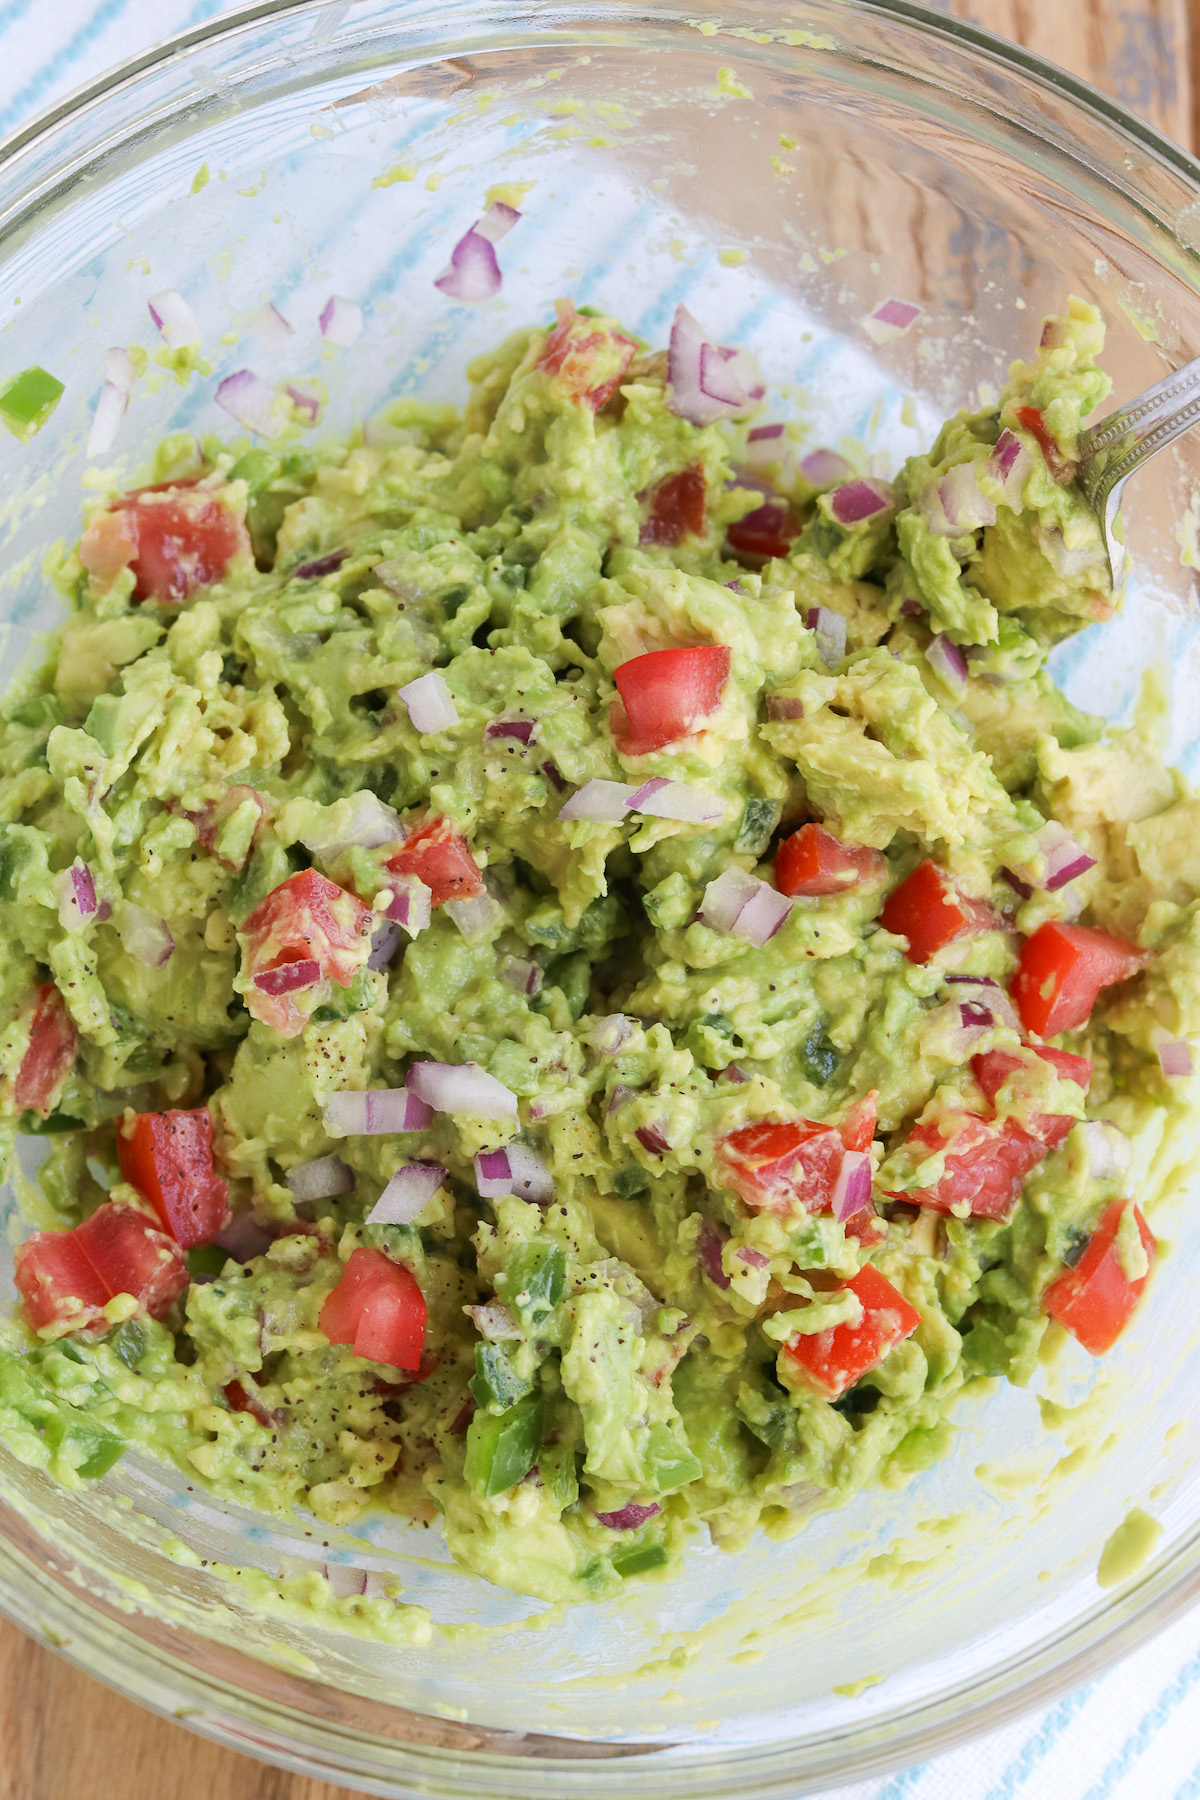 bowl of semi-mashed avocado with chunks of tomato and purple onion